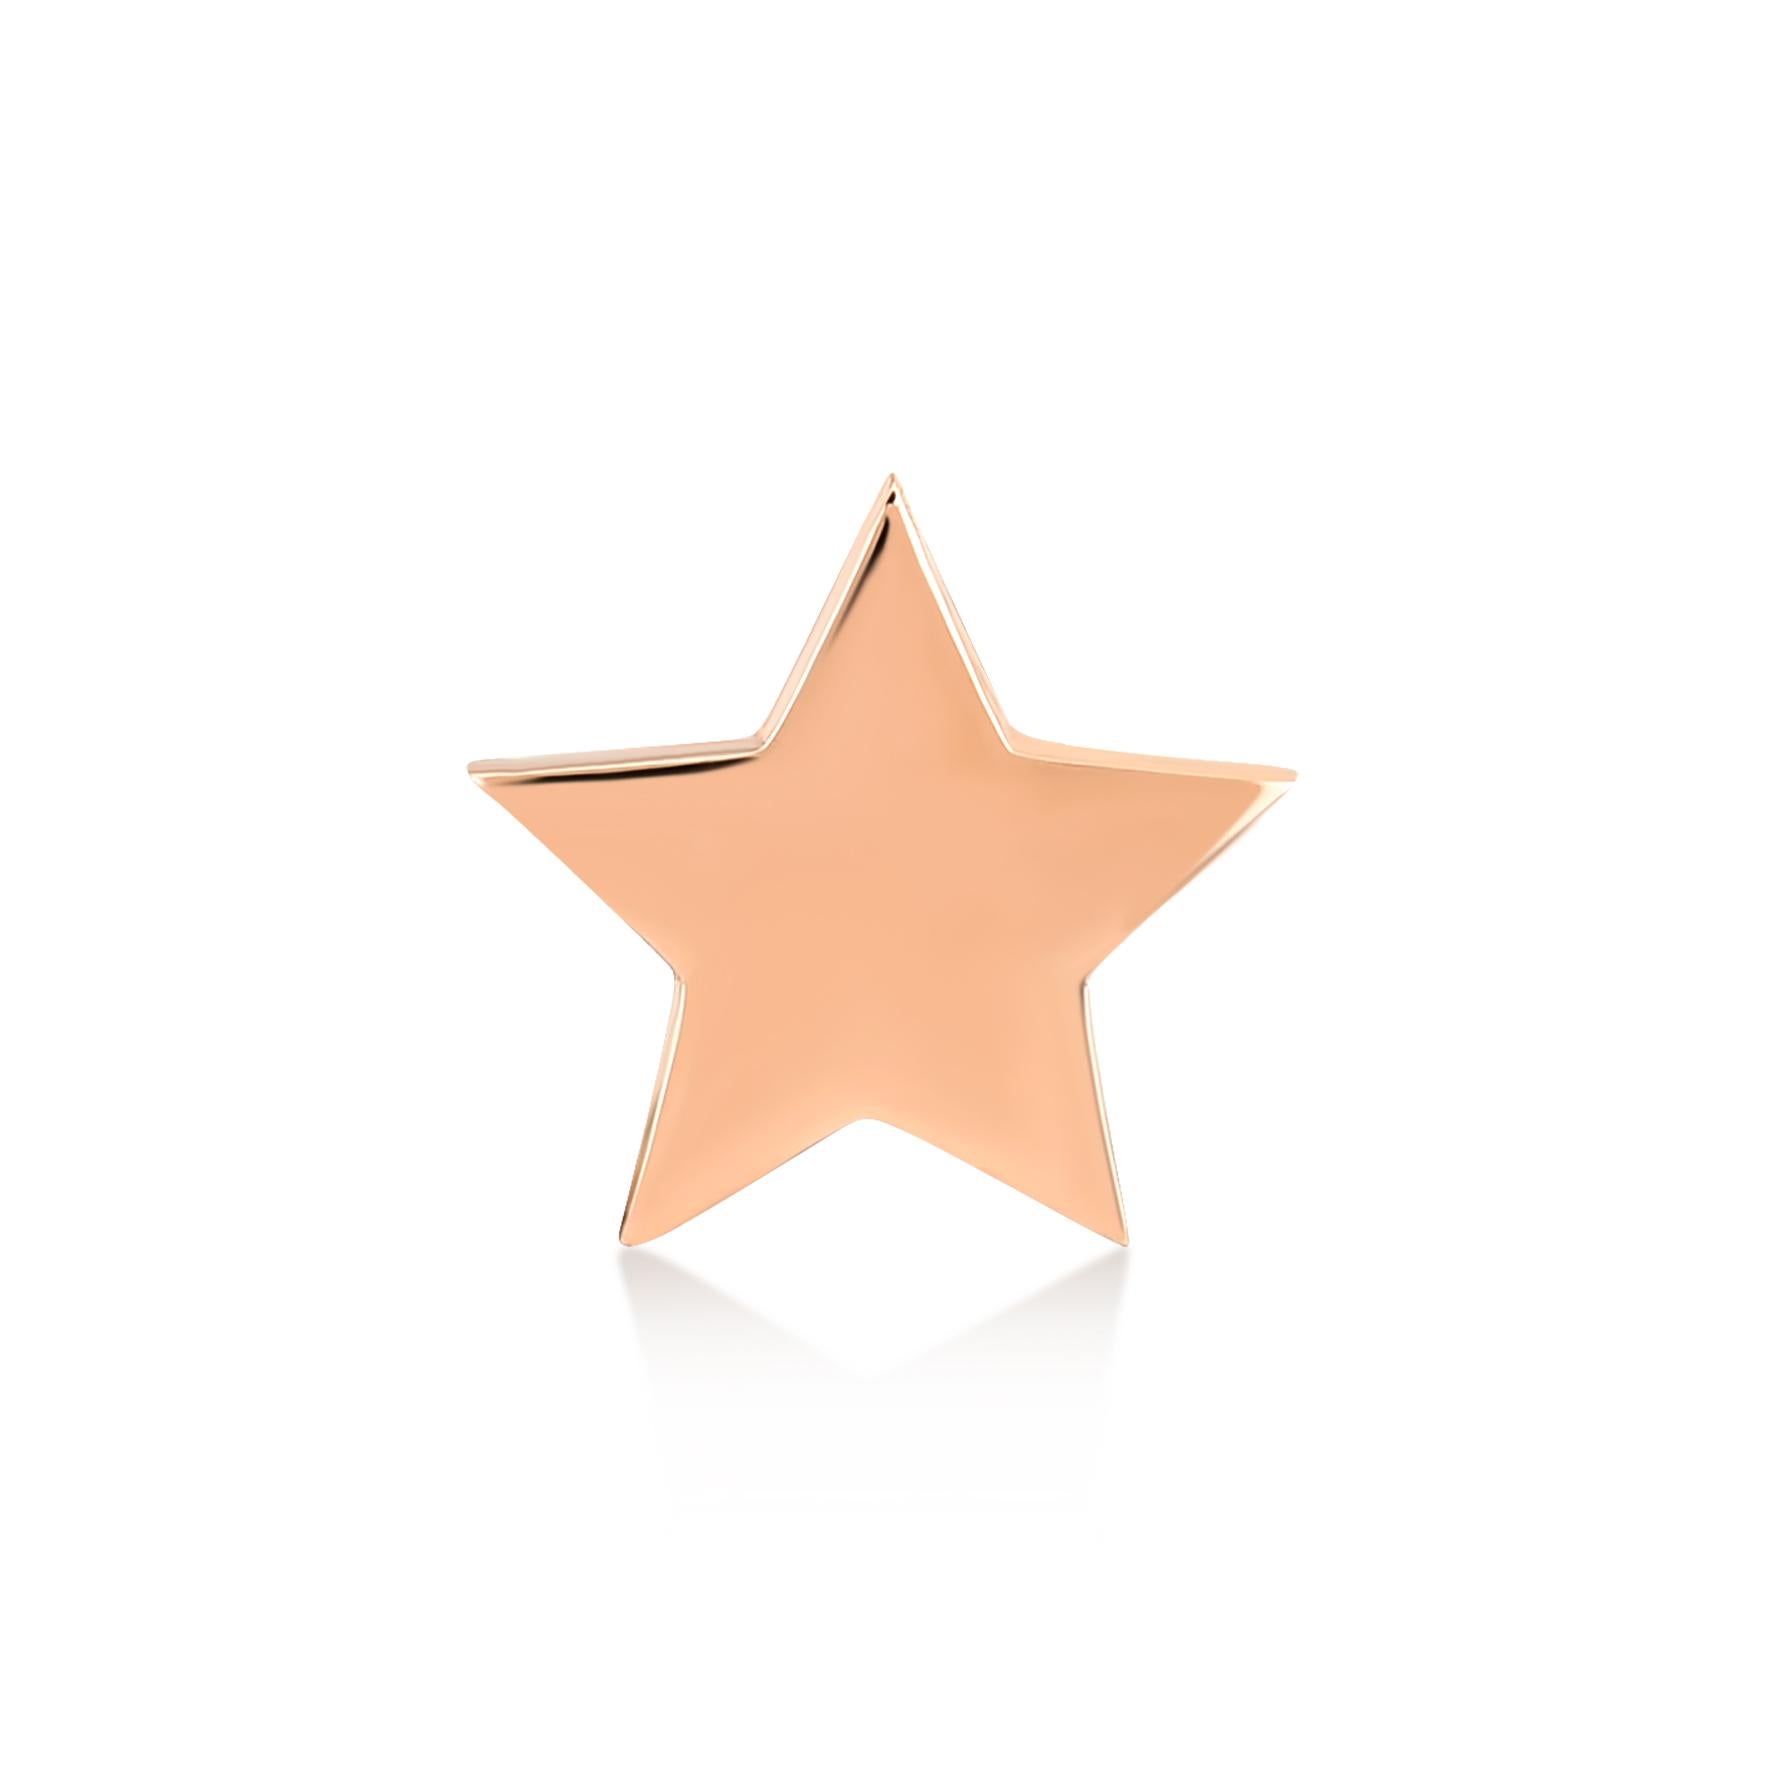 Star small (single) 14k rose gold stud earring by Selda Jewellery

Additional Information:-
Collection: You Are My Star Collection
14k Rose gold
Height 0.5mm